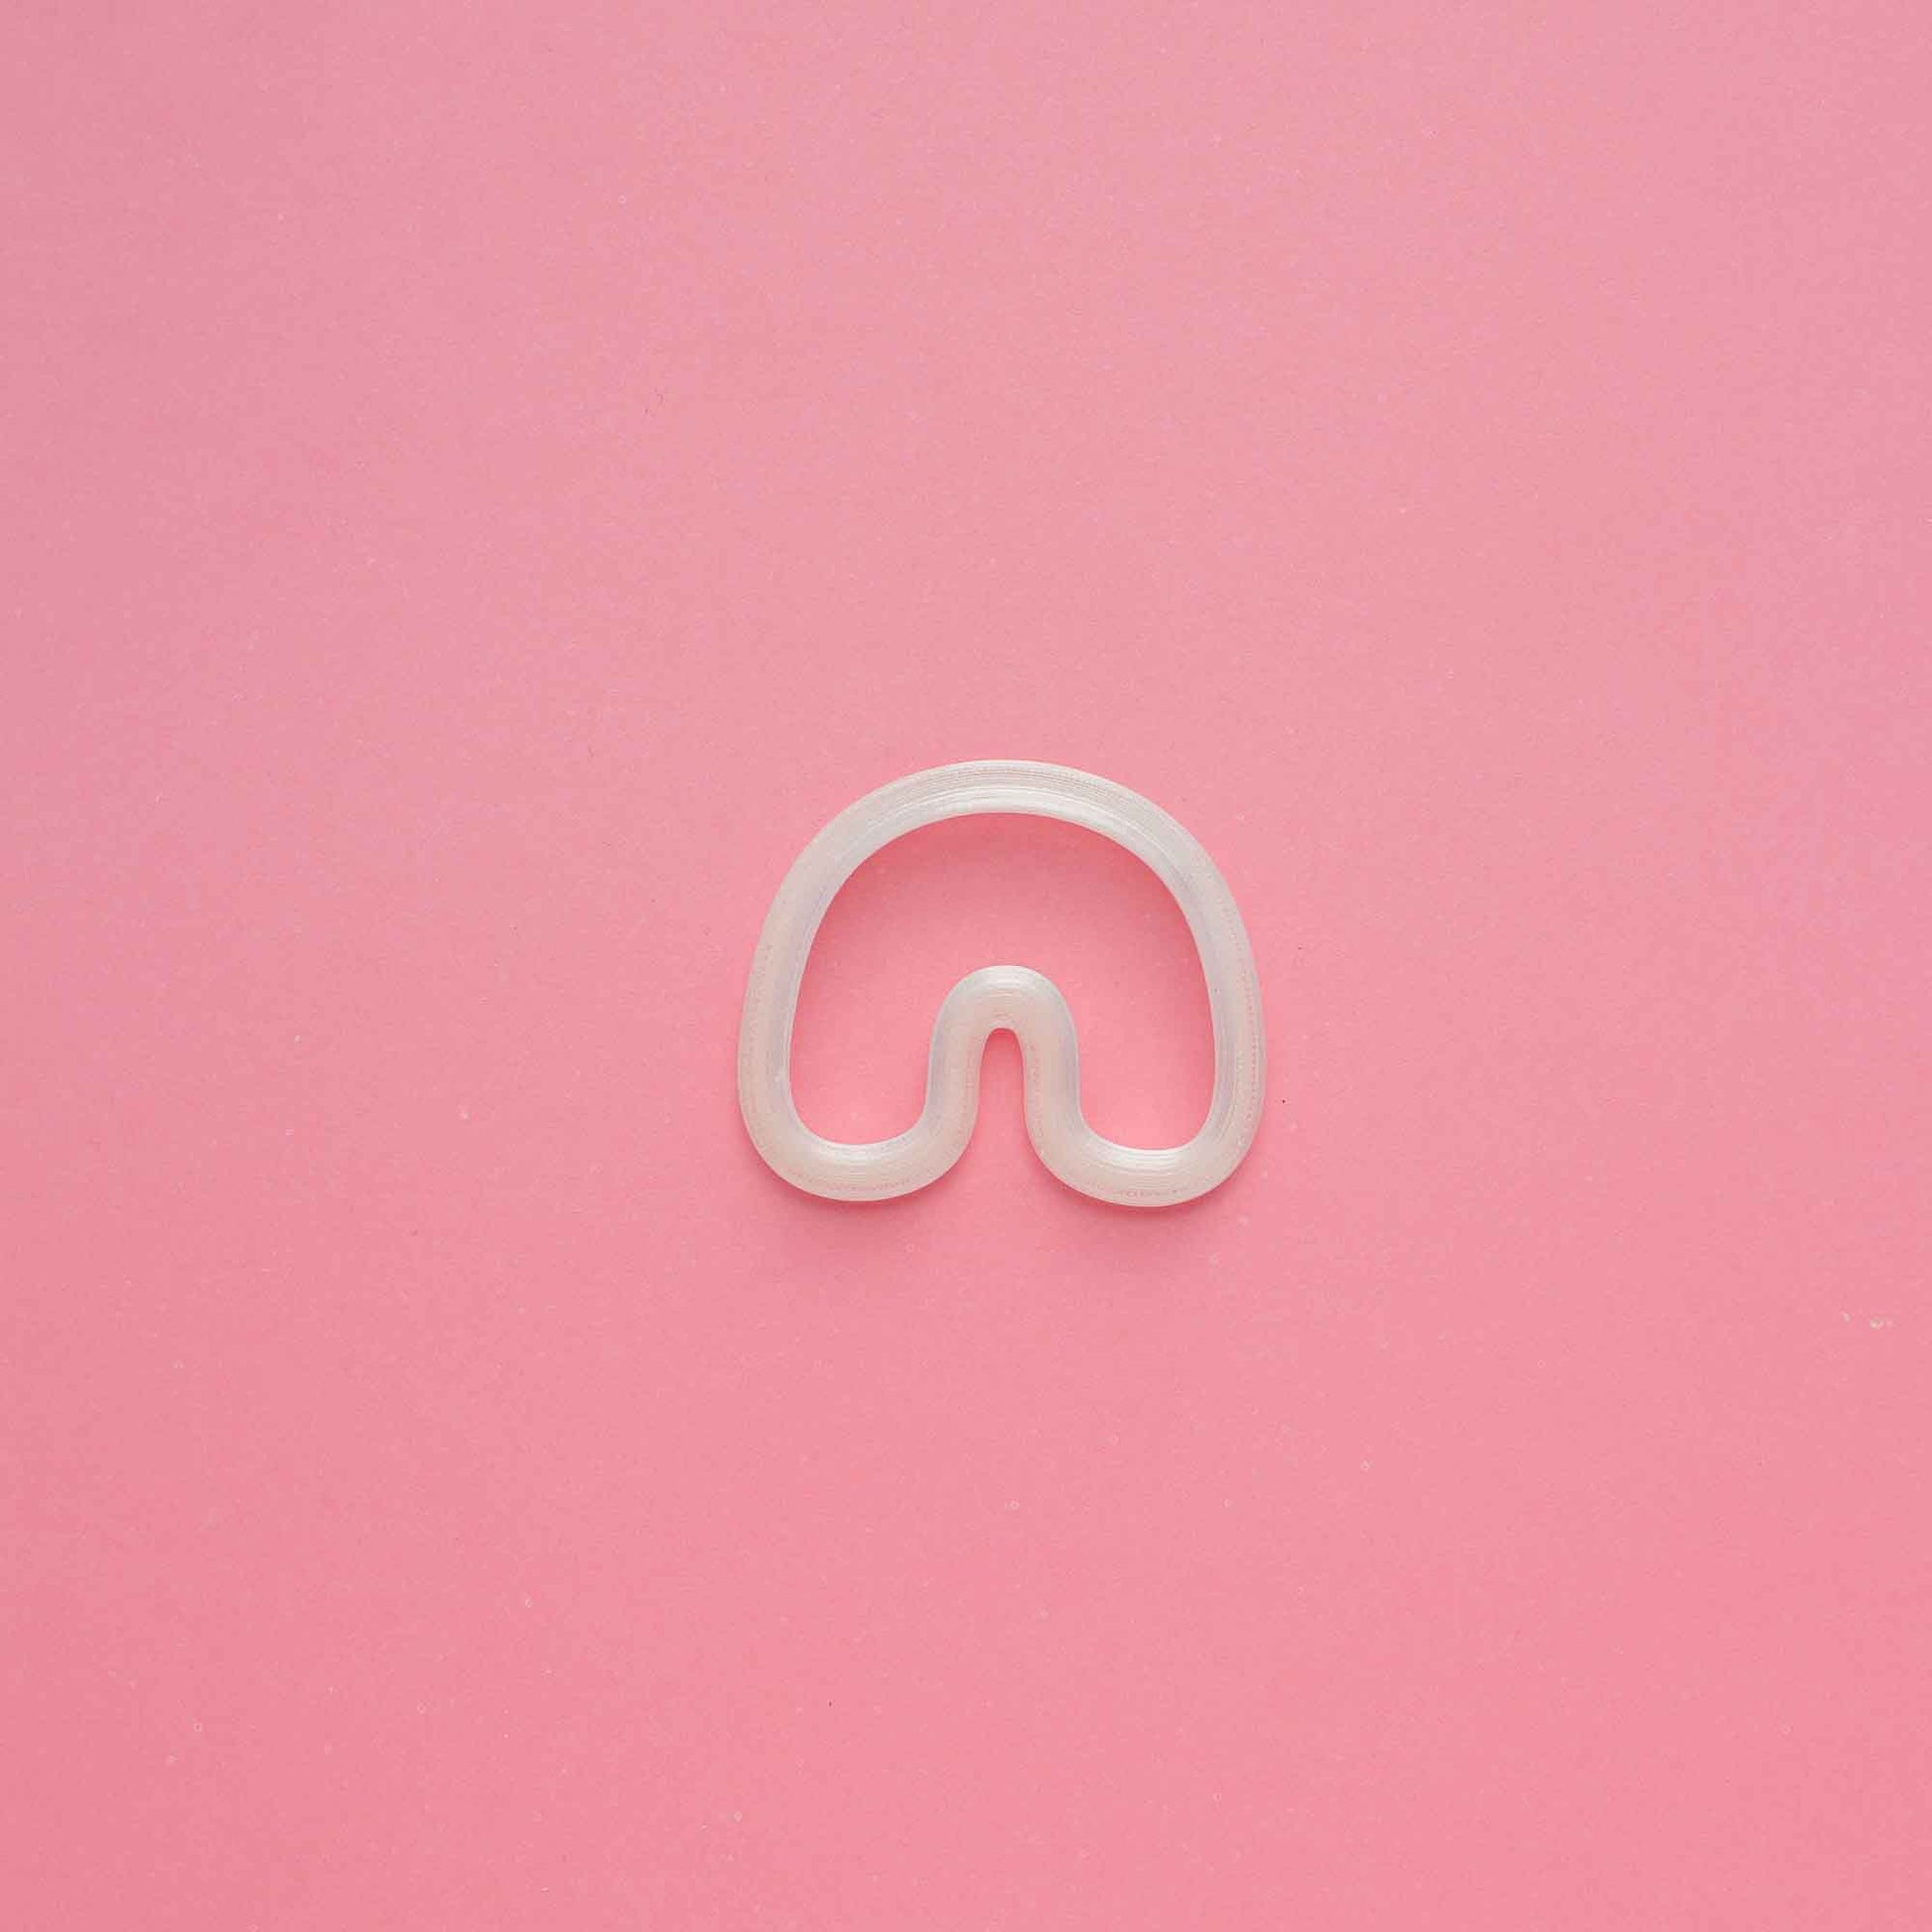 1 clay organic arch clay cutter on a pink background